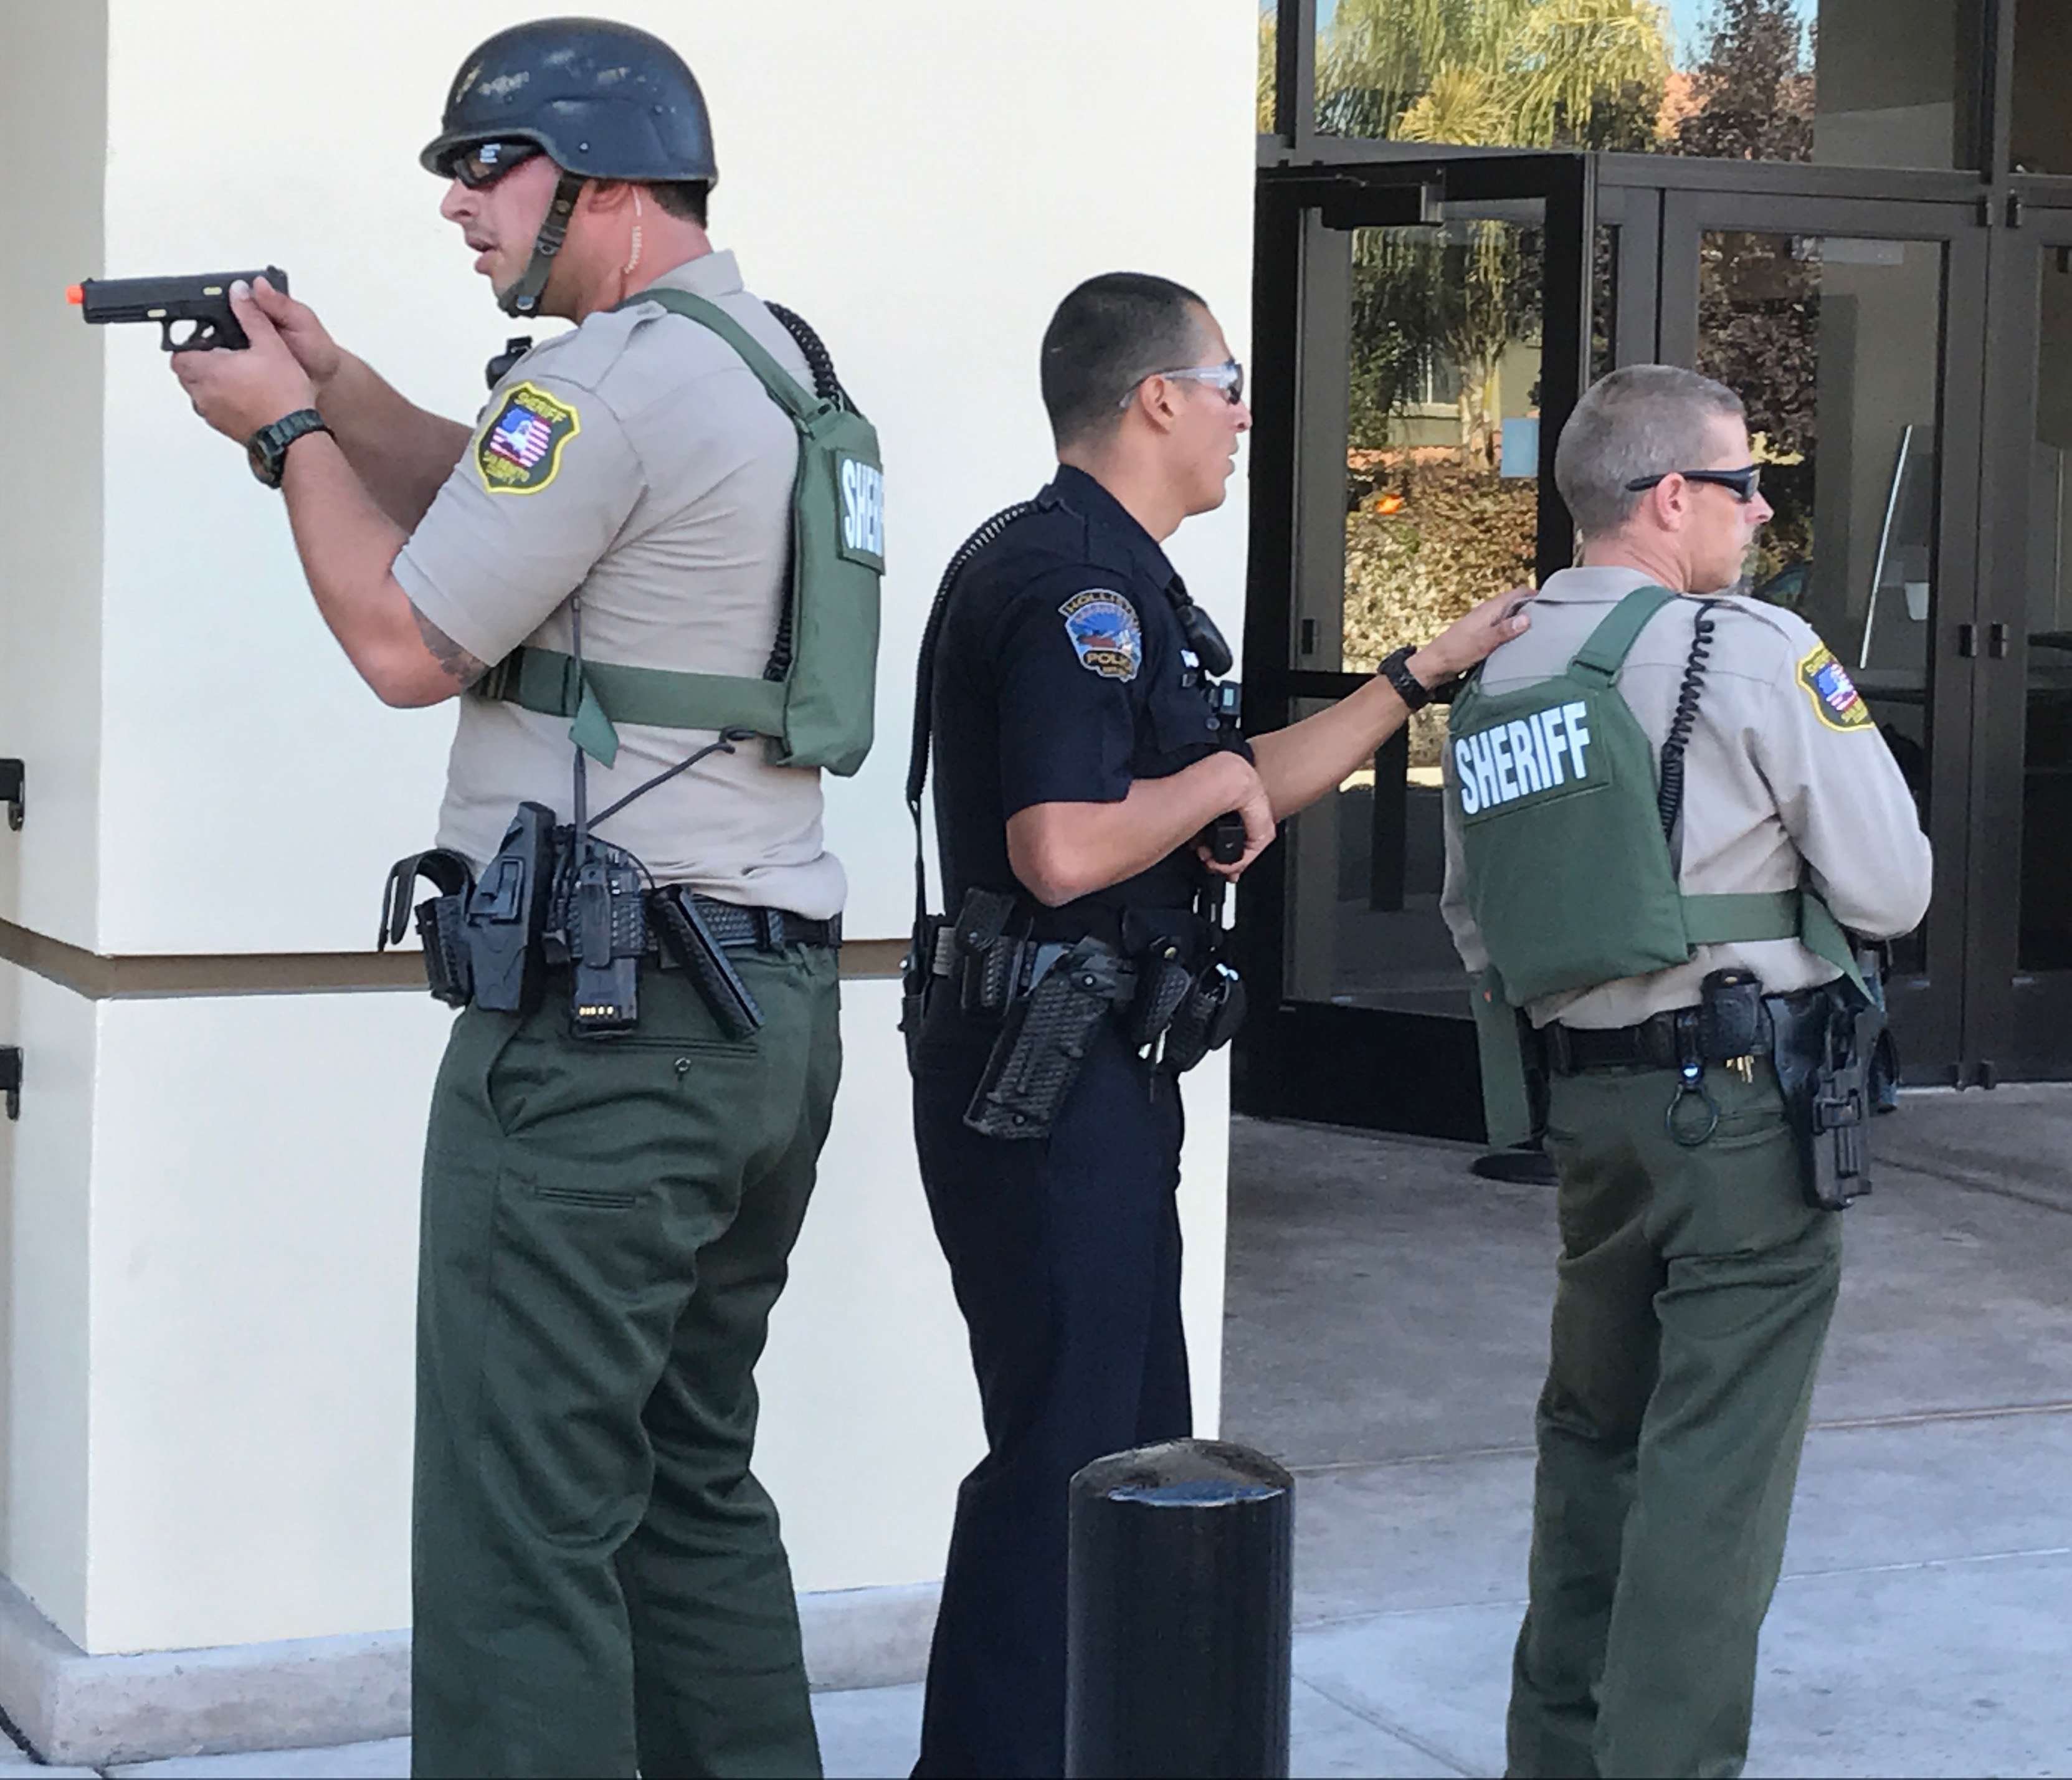 Hollister police and San Benito County sheriff's deputies outside Premiere Cinemas during the active shooter drill Nov. 17.